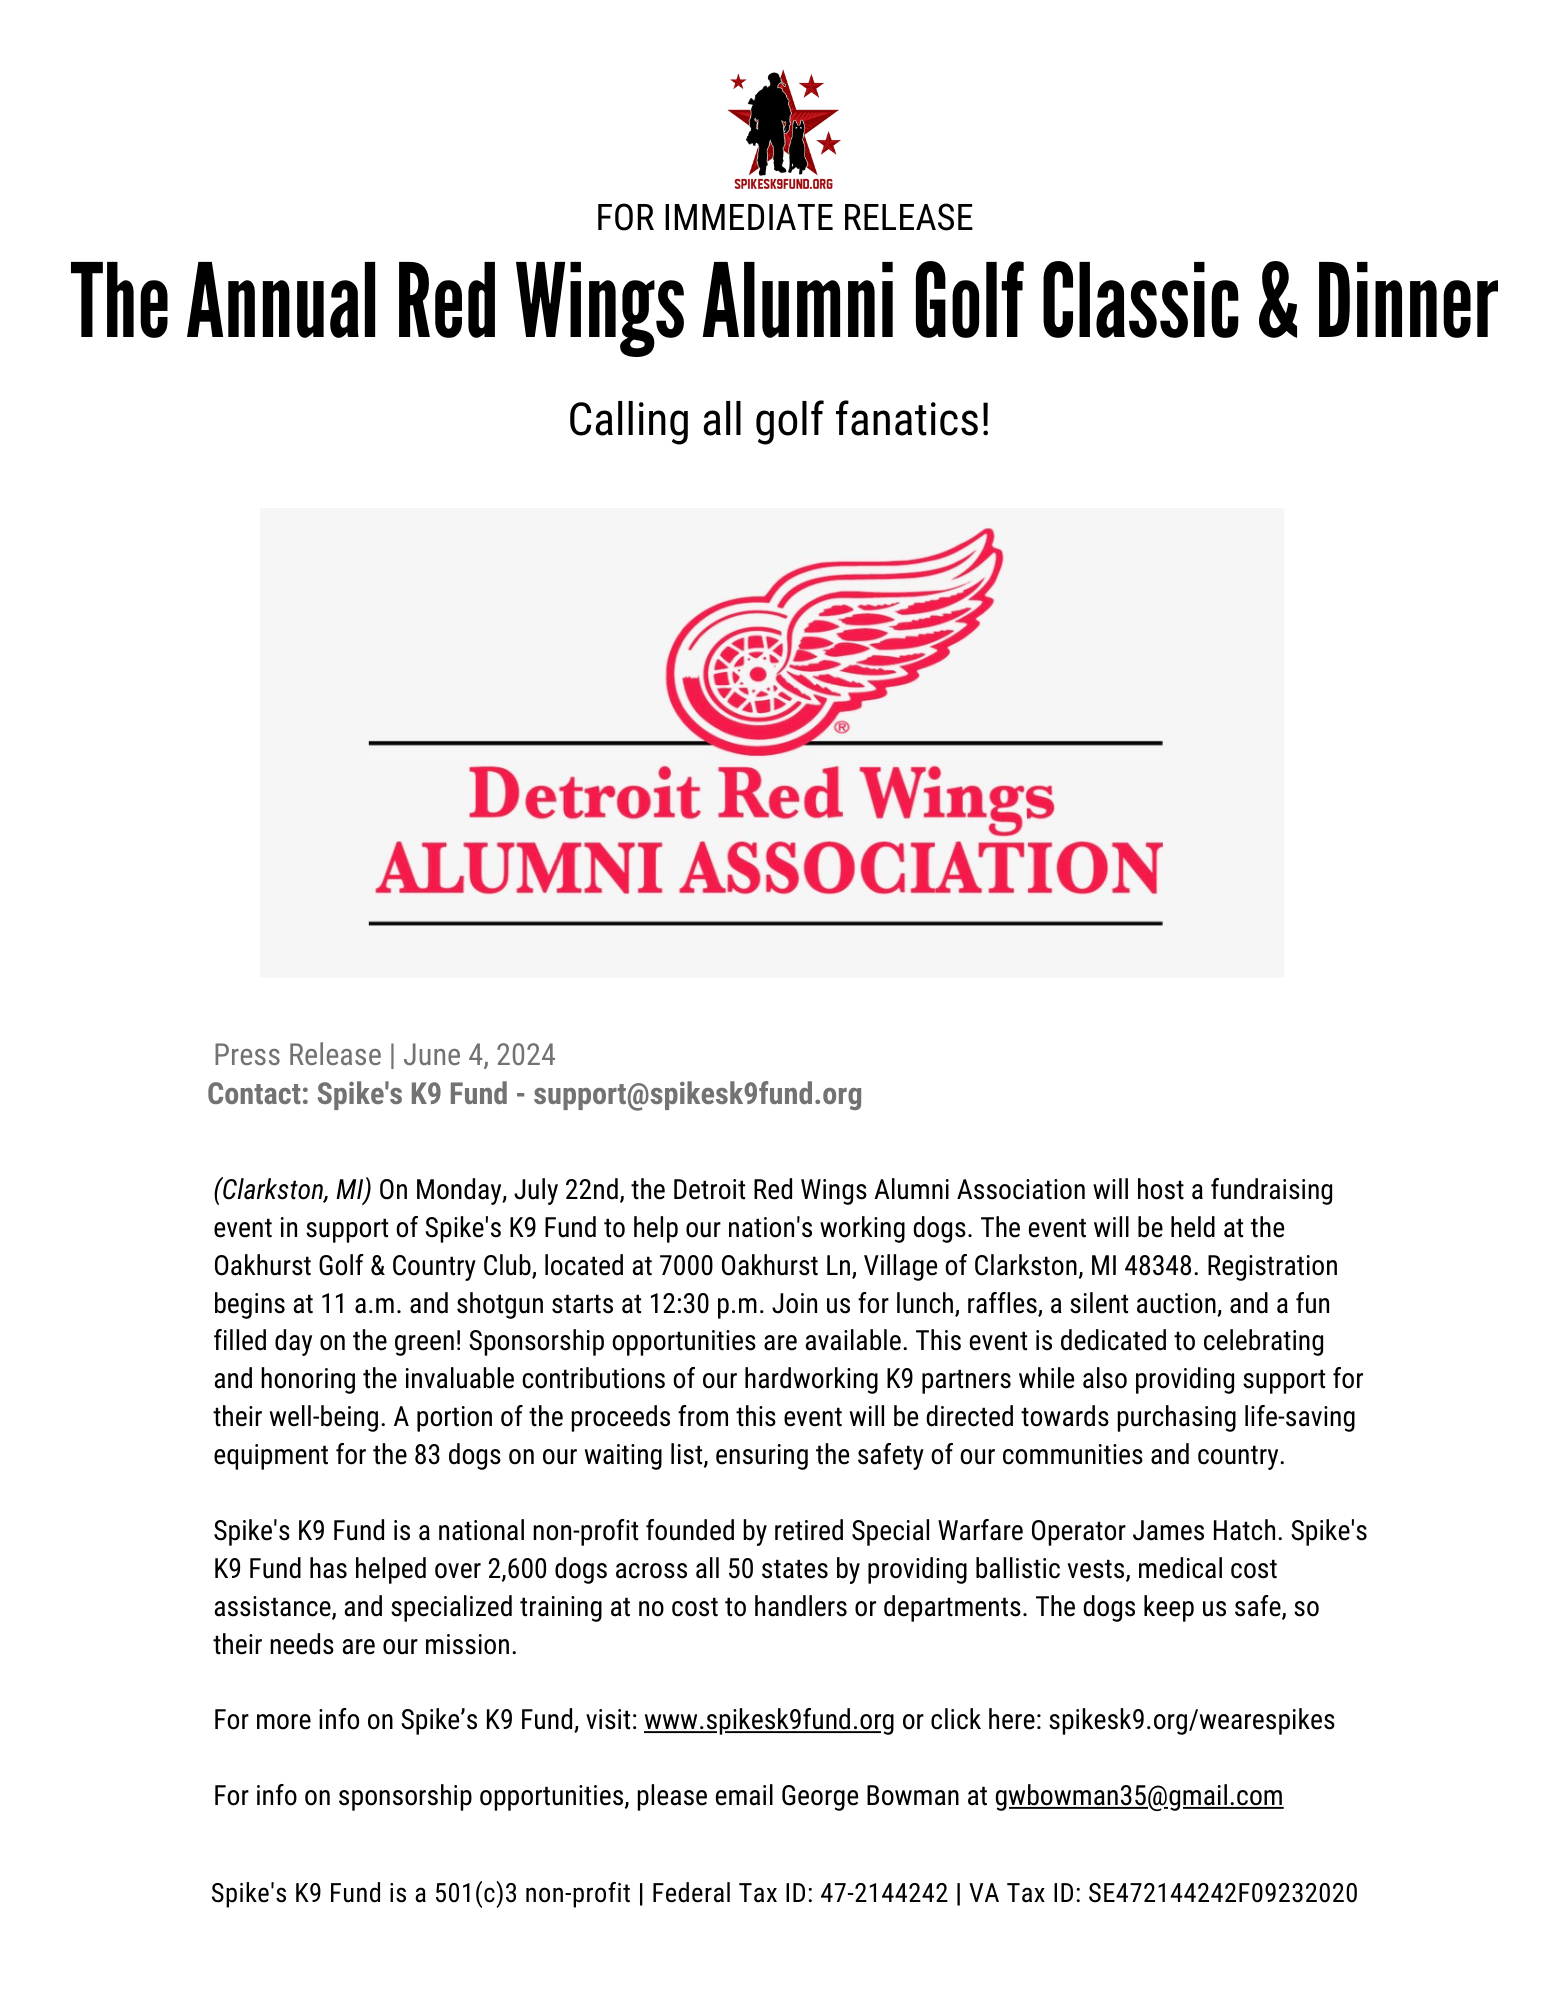 The Annual Red Wings Alumni Golf Classic & Dinner